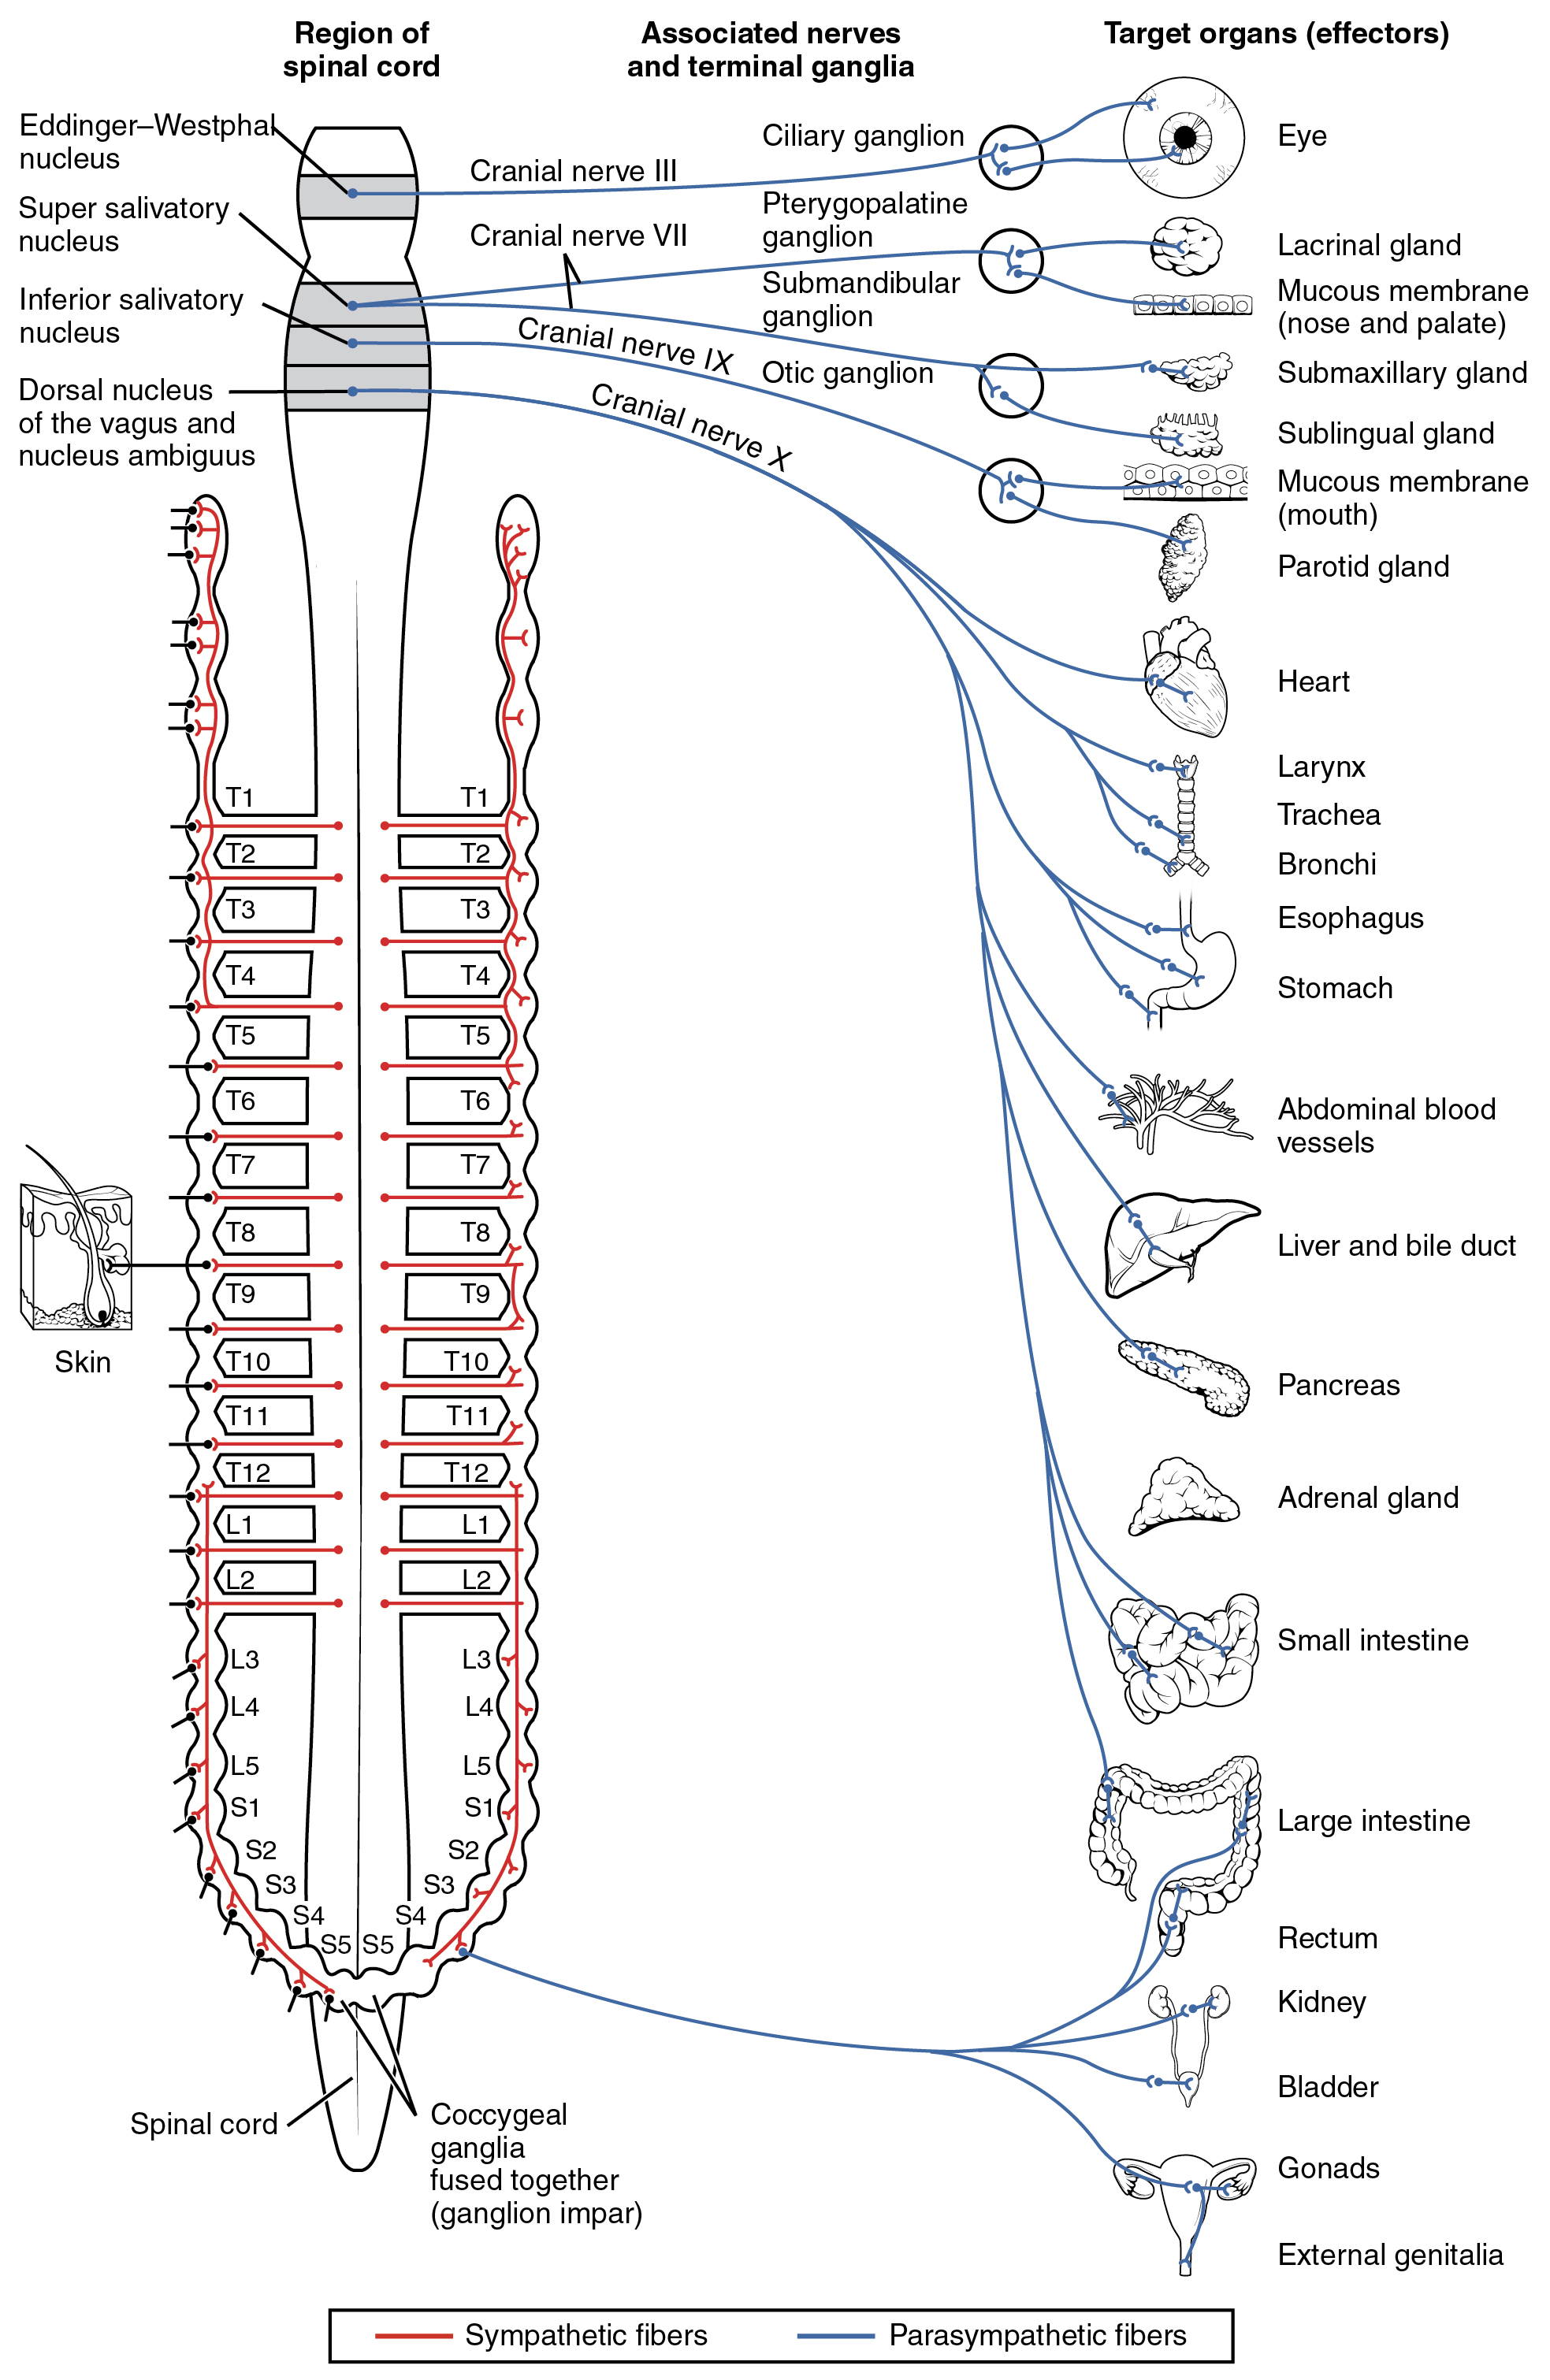 1503_Connections_of_the_Parasympathetic_Nervous_System.jpg